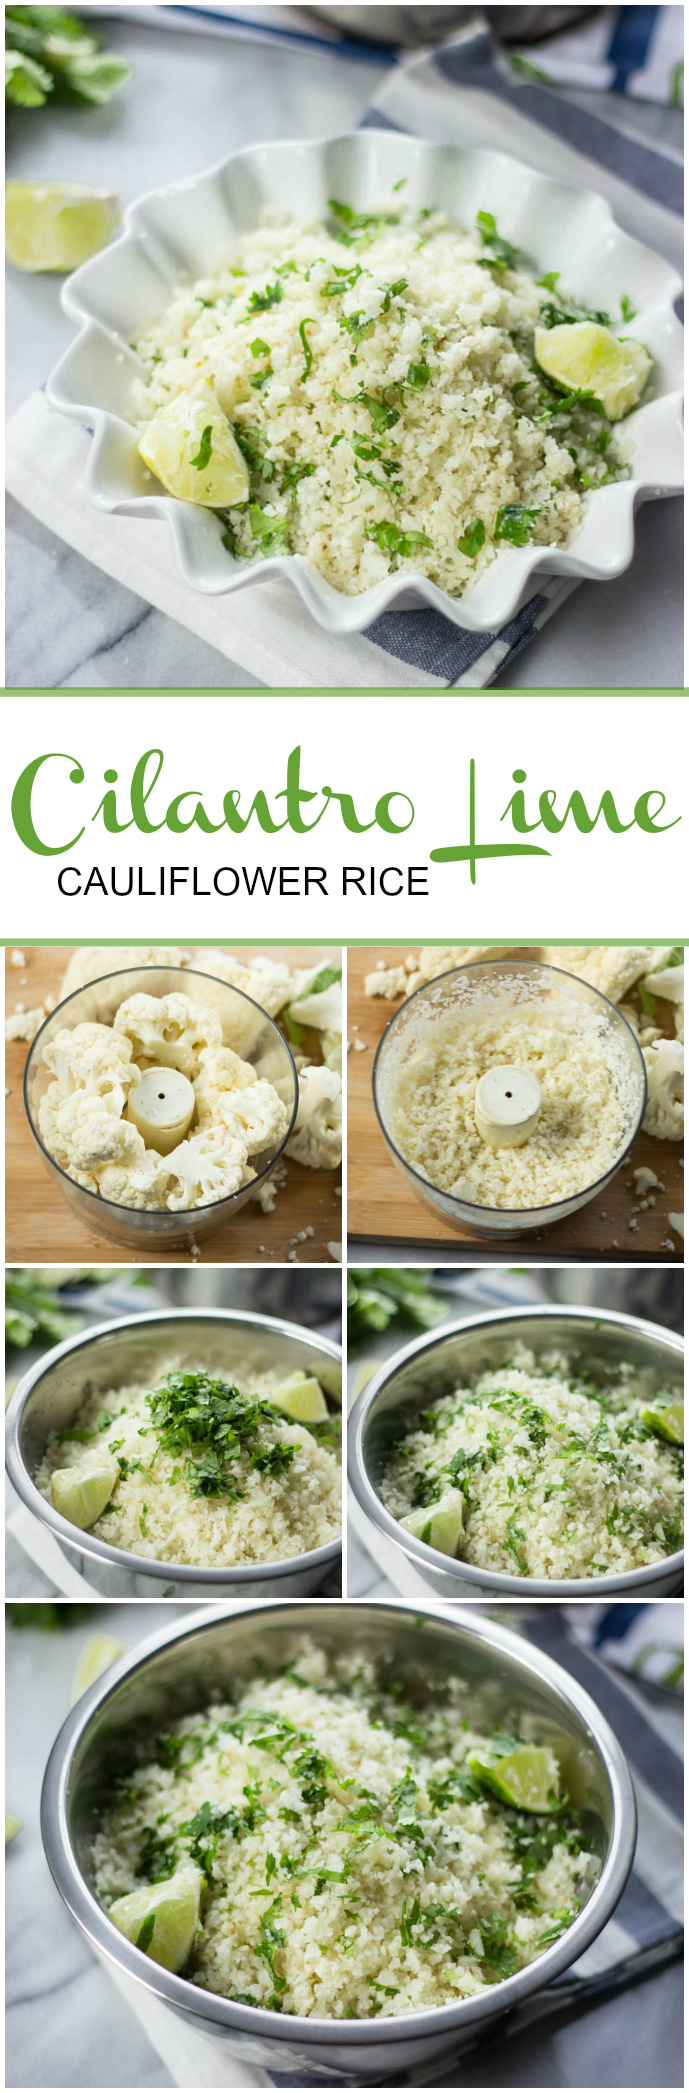 Cilantro Lime Cauliflower "Rice" (Low-carb, Healthy, Quick)  #Weightloss #vegan #vegetarian #sides